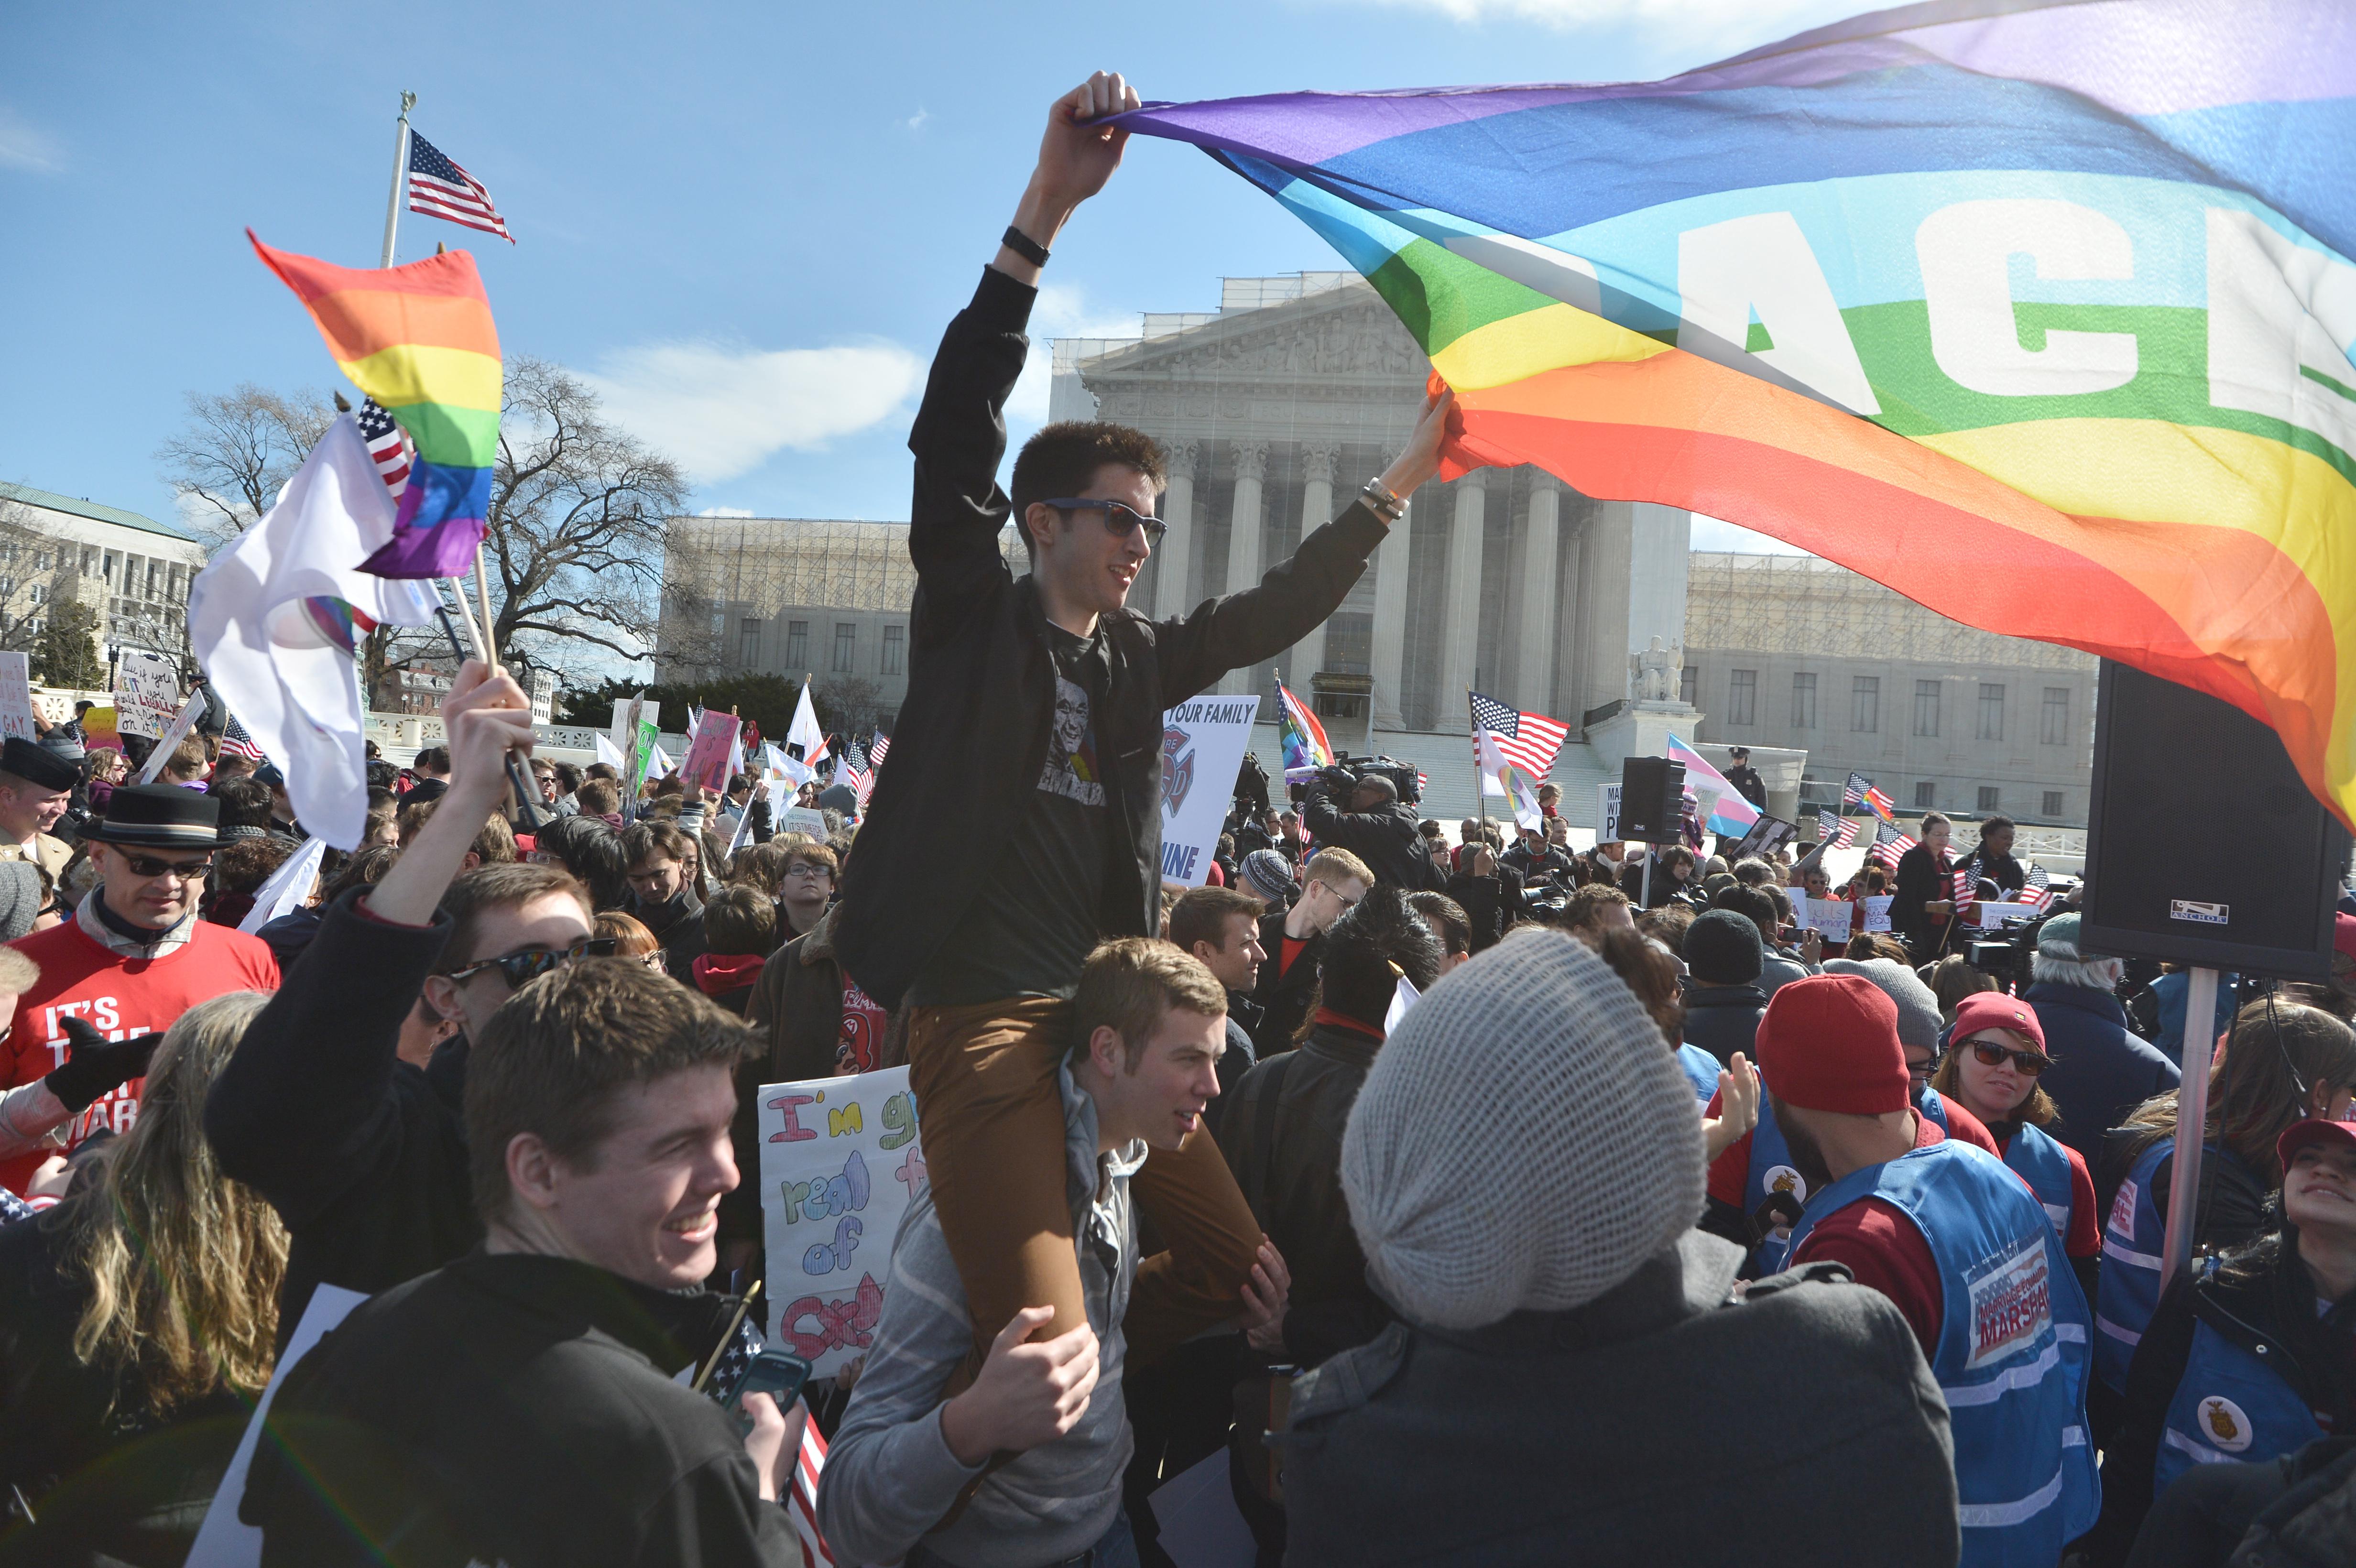 Same-sex marriage supporters demonstrate in front of the Supreme Court on March 27, 2013, in Washington, D.C.